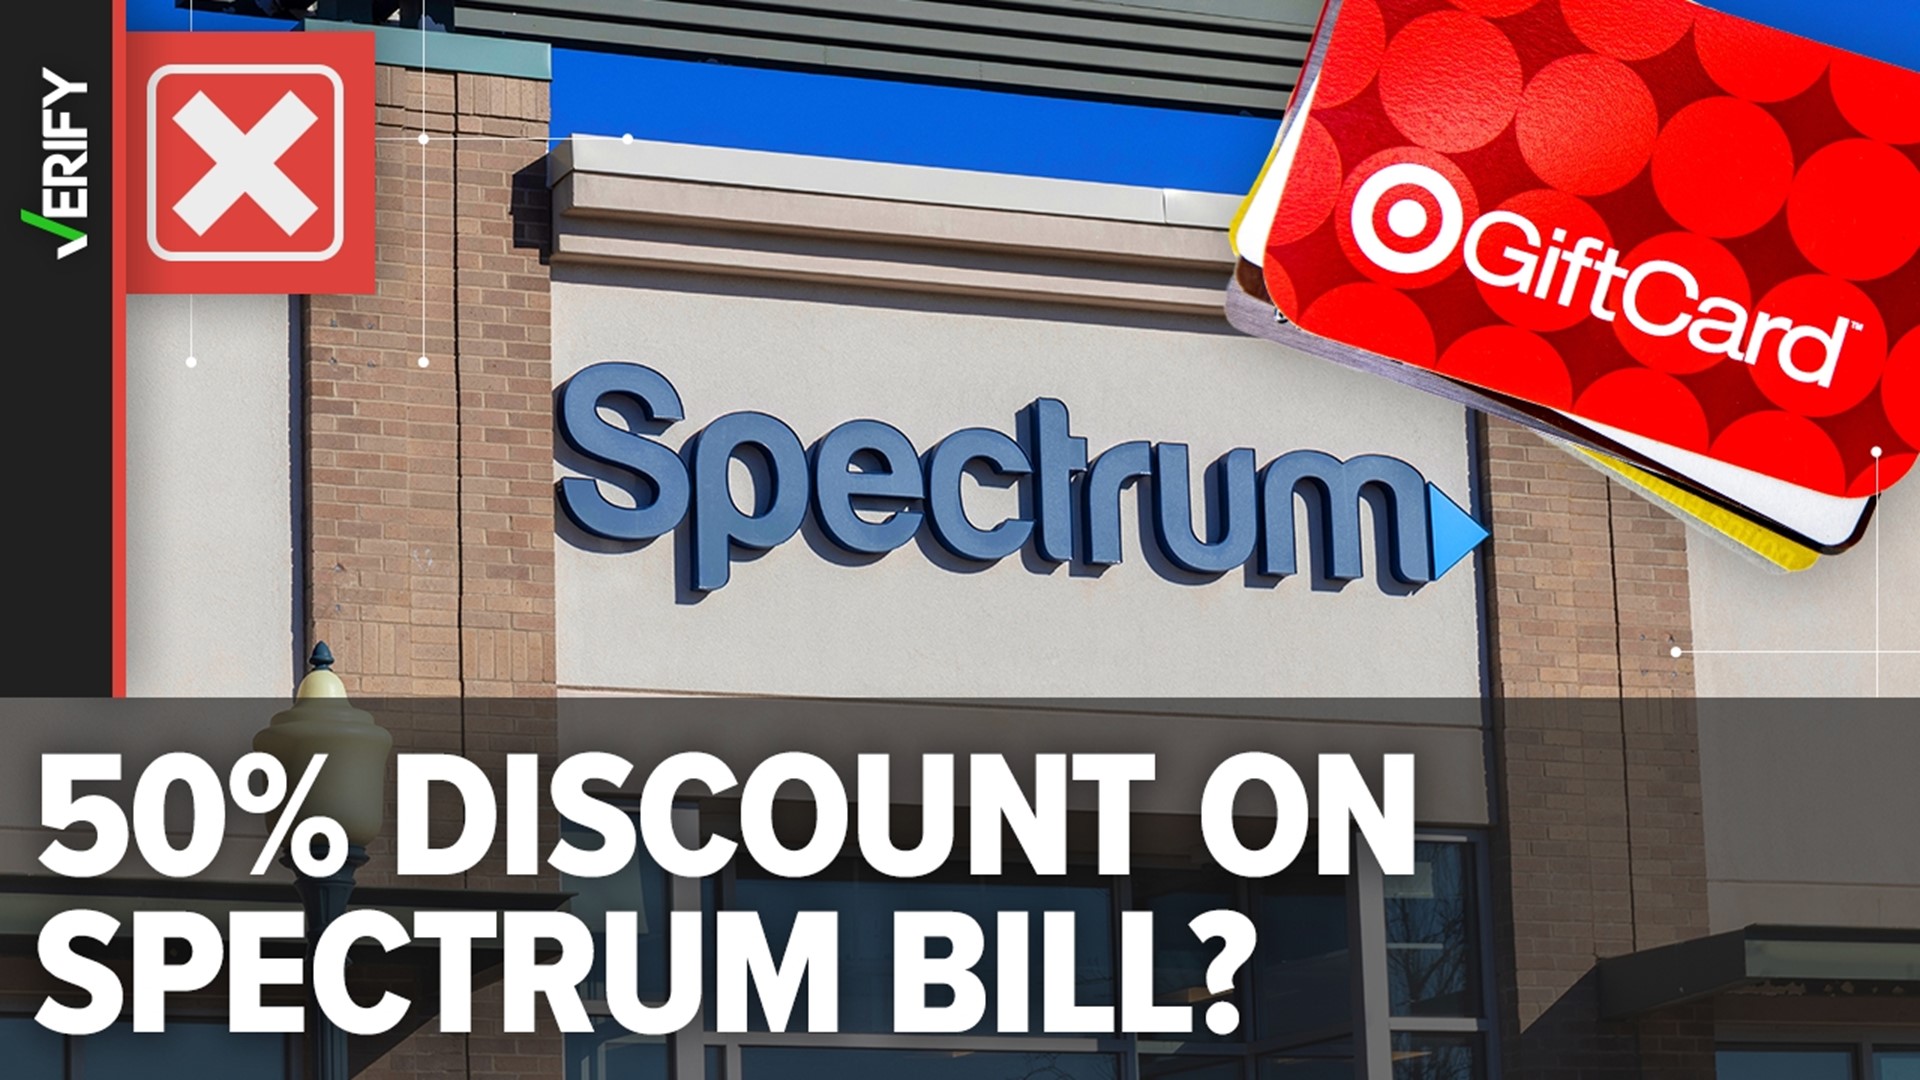 Calls claiming to be from Spectrum offering a 50% discount on cable or internet service via payment with a Target gift card are a scam.